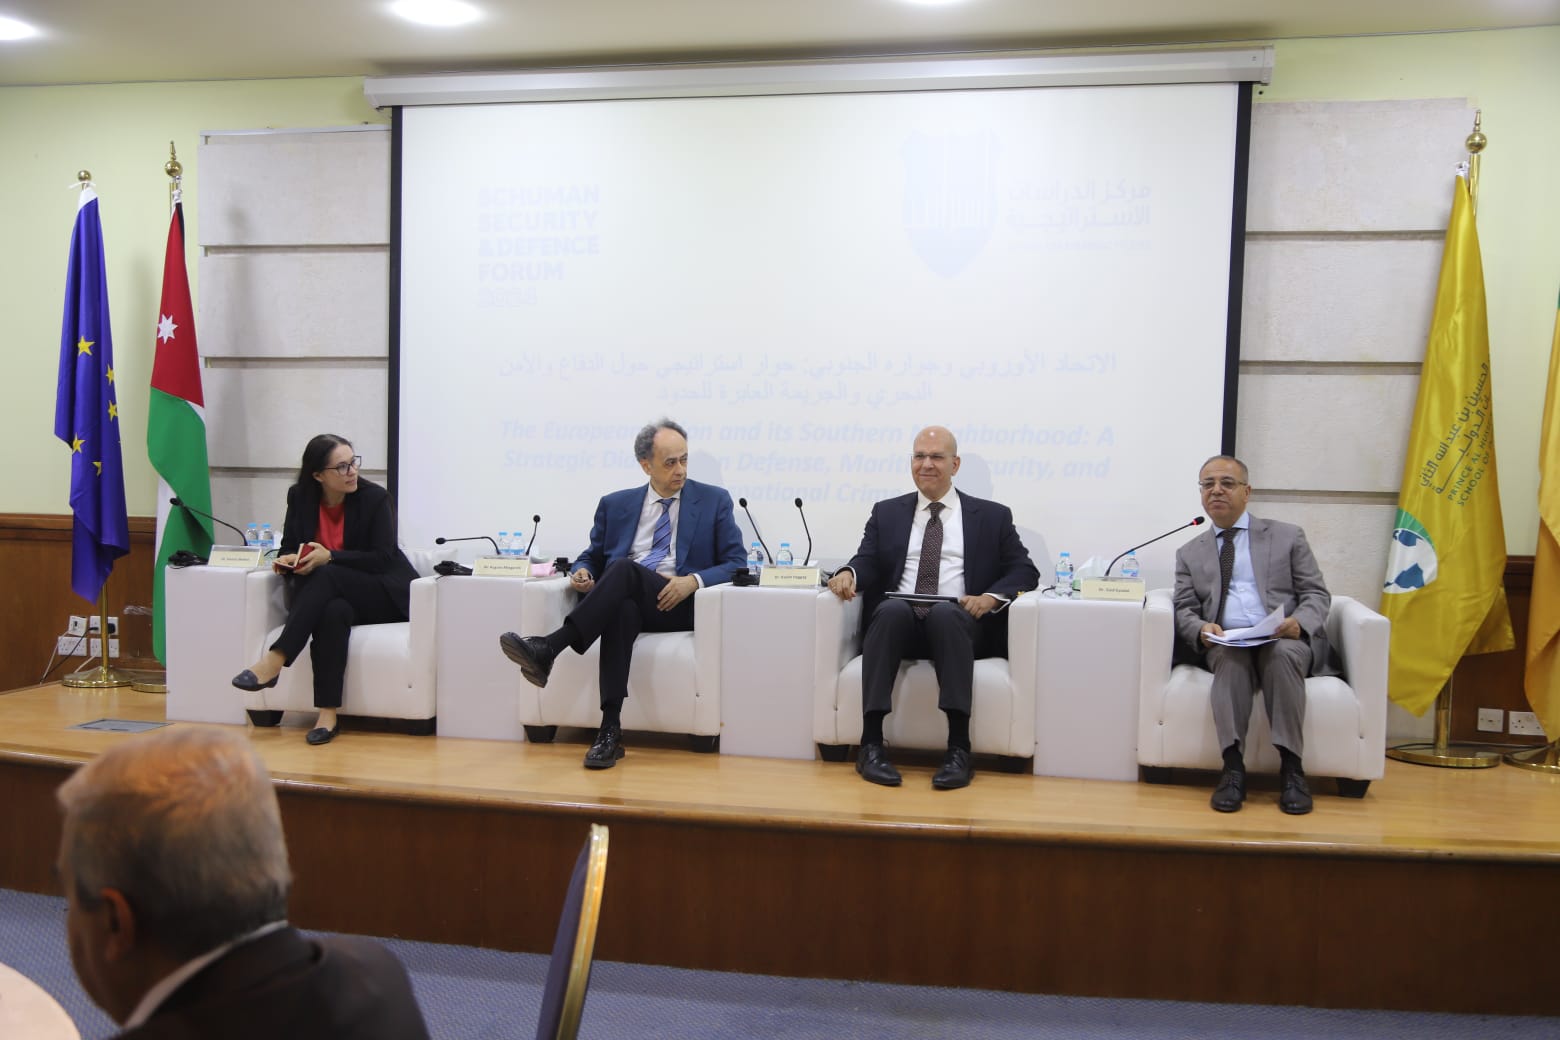 EU, Center for Strategic Studies host “Road to Schuman” conference 